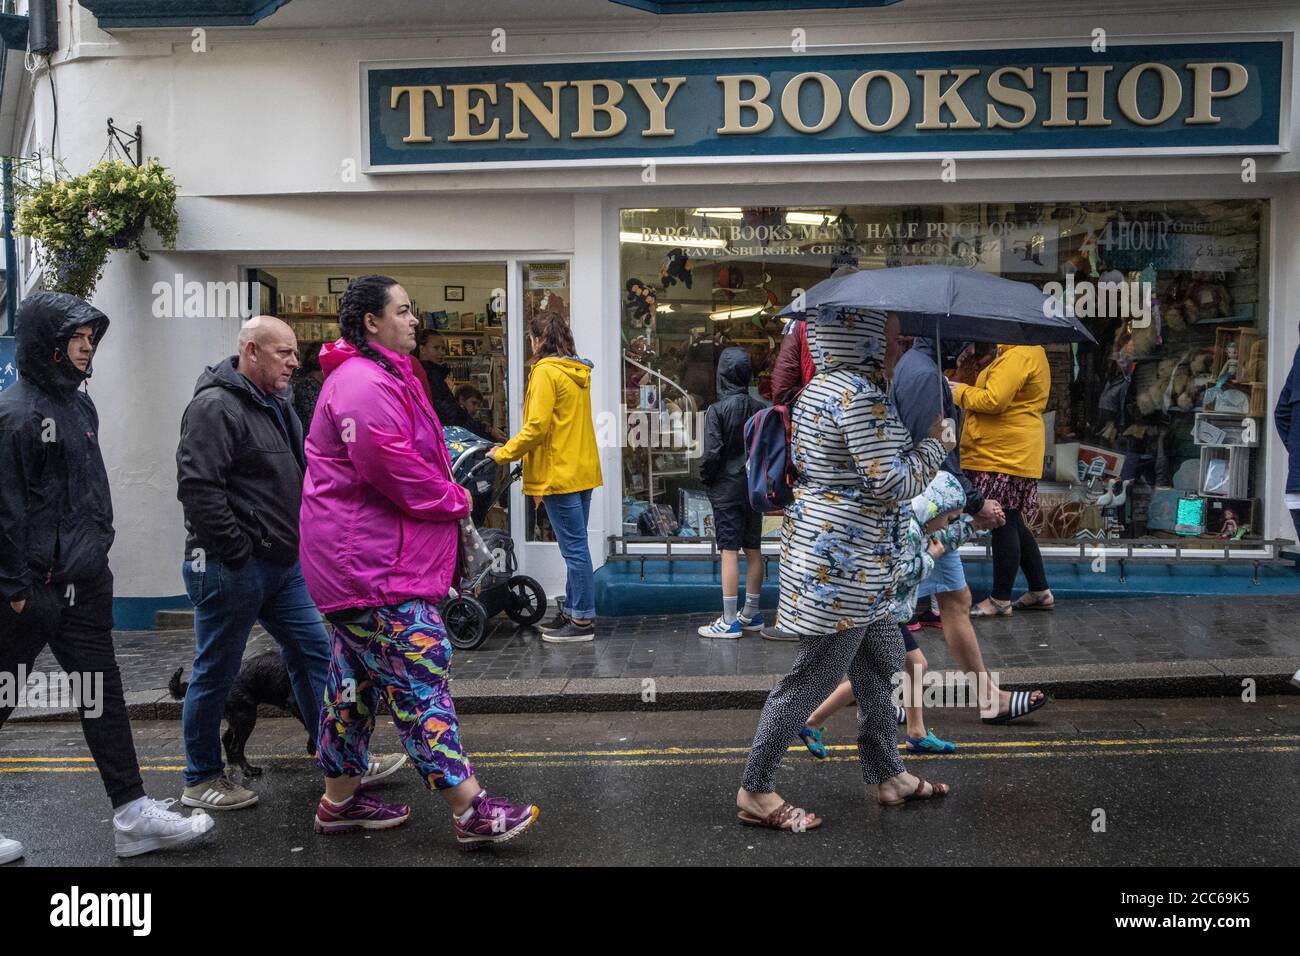 Tenby, West Wales. 19th Aug 2020. UK Weather: Tourists queue in the rain outside a bookshop on the high street at Tenby looking for alternative things to do. During the post-lockdown tourists have found a lot of attractions still closed to visitors in West Wales. Storms and bad weather hit South England and West Wales during the night and continued into the day keeping tourists off the beaches across Pembrokeshire, United Kingdom. Wednesday 19th August 2020. Tenby, Pembrokeshire, West Wales, UK Credit: Jeff Gilbert/Alamy Live News Stock Photo